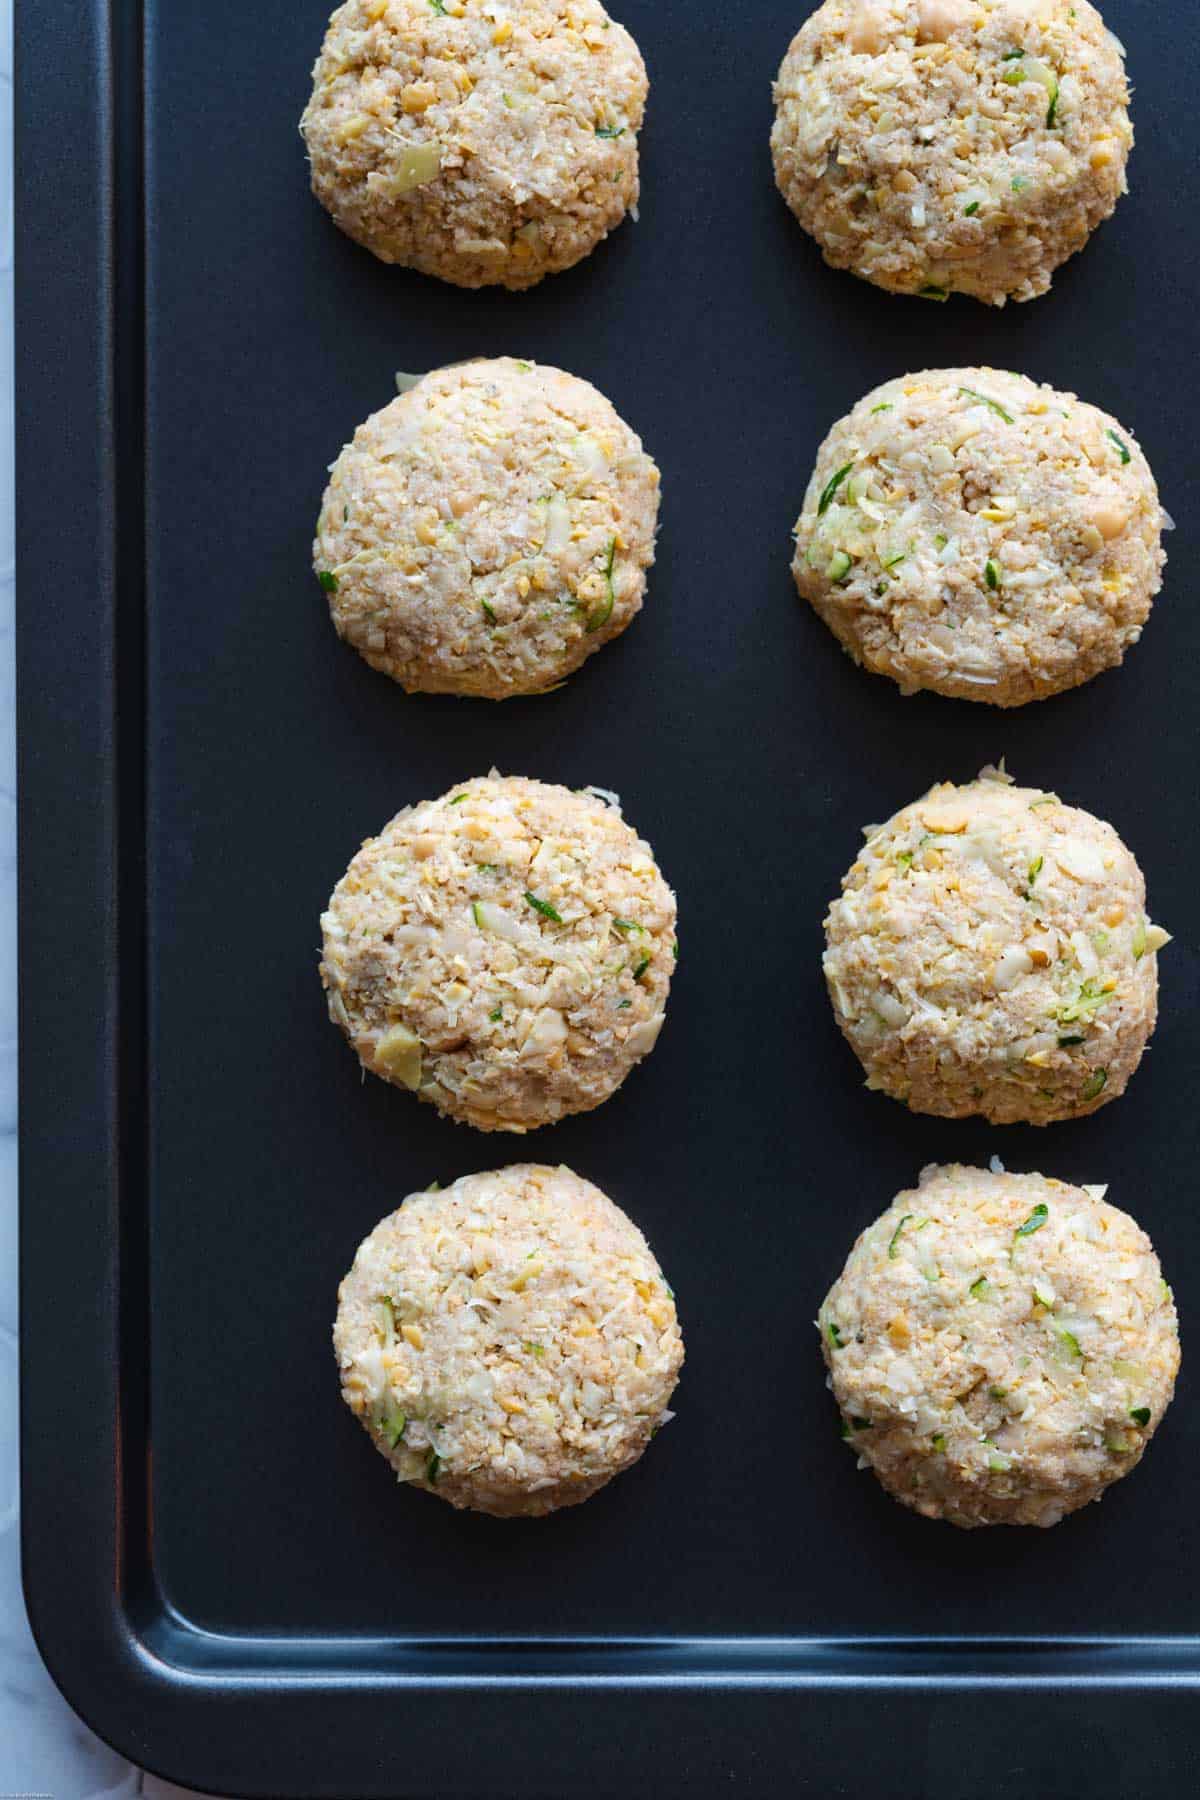 Eleven Vegan Crab Cakes with Artichoke Hearts on a large nonstick baking sheet ready to be baked.